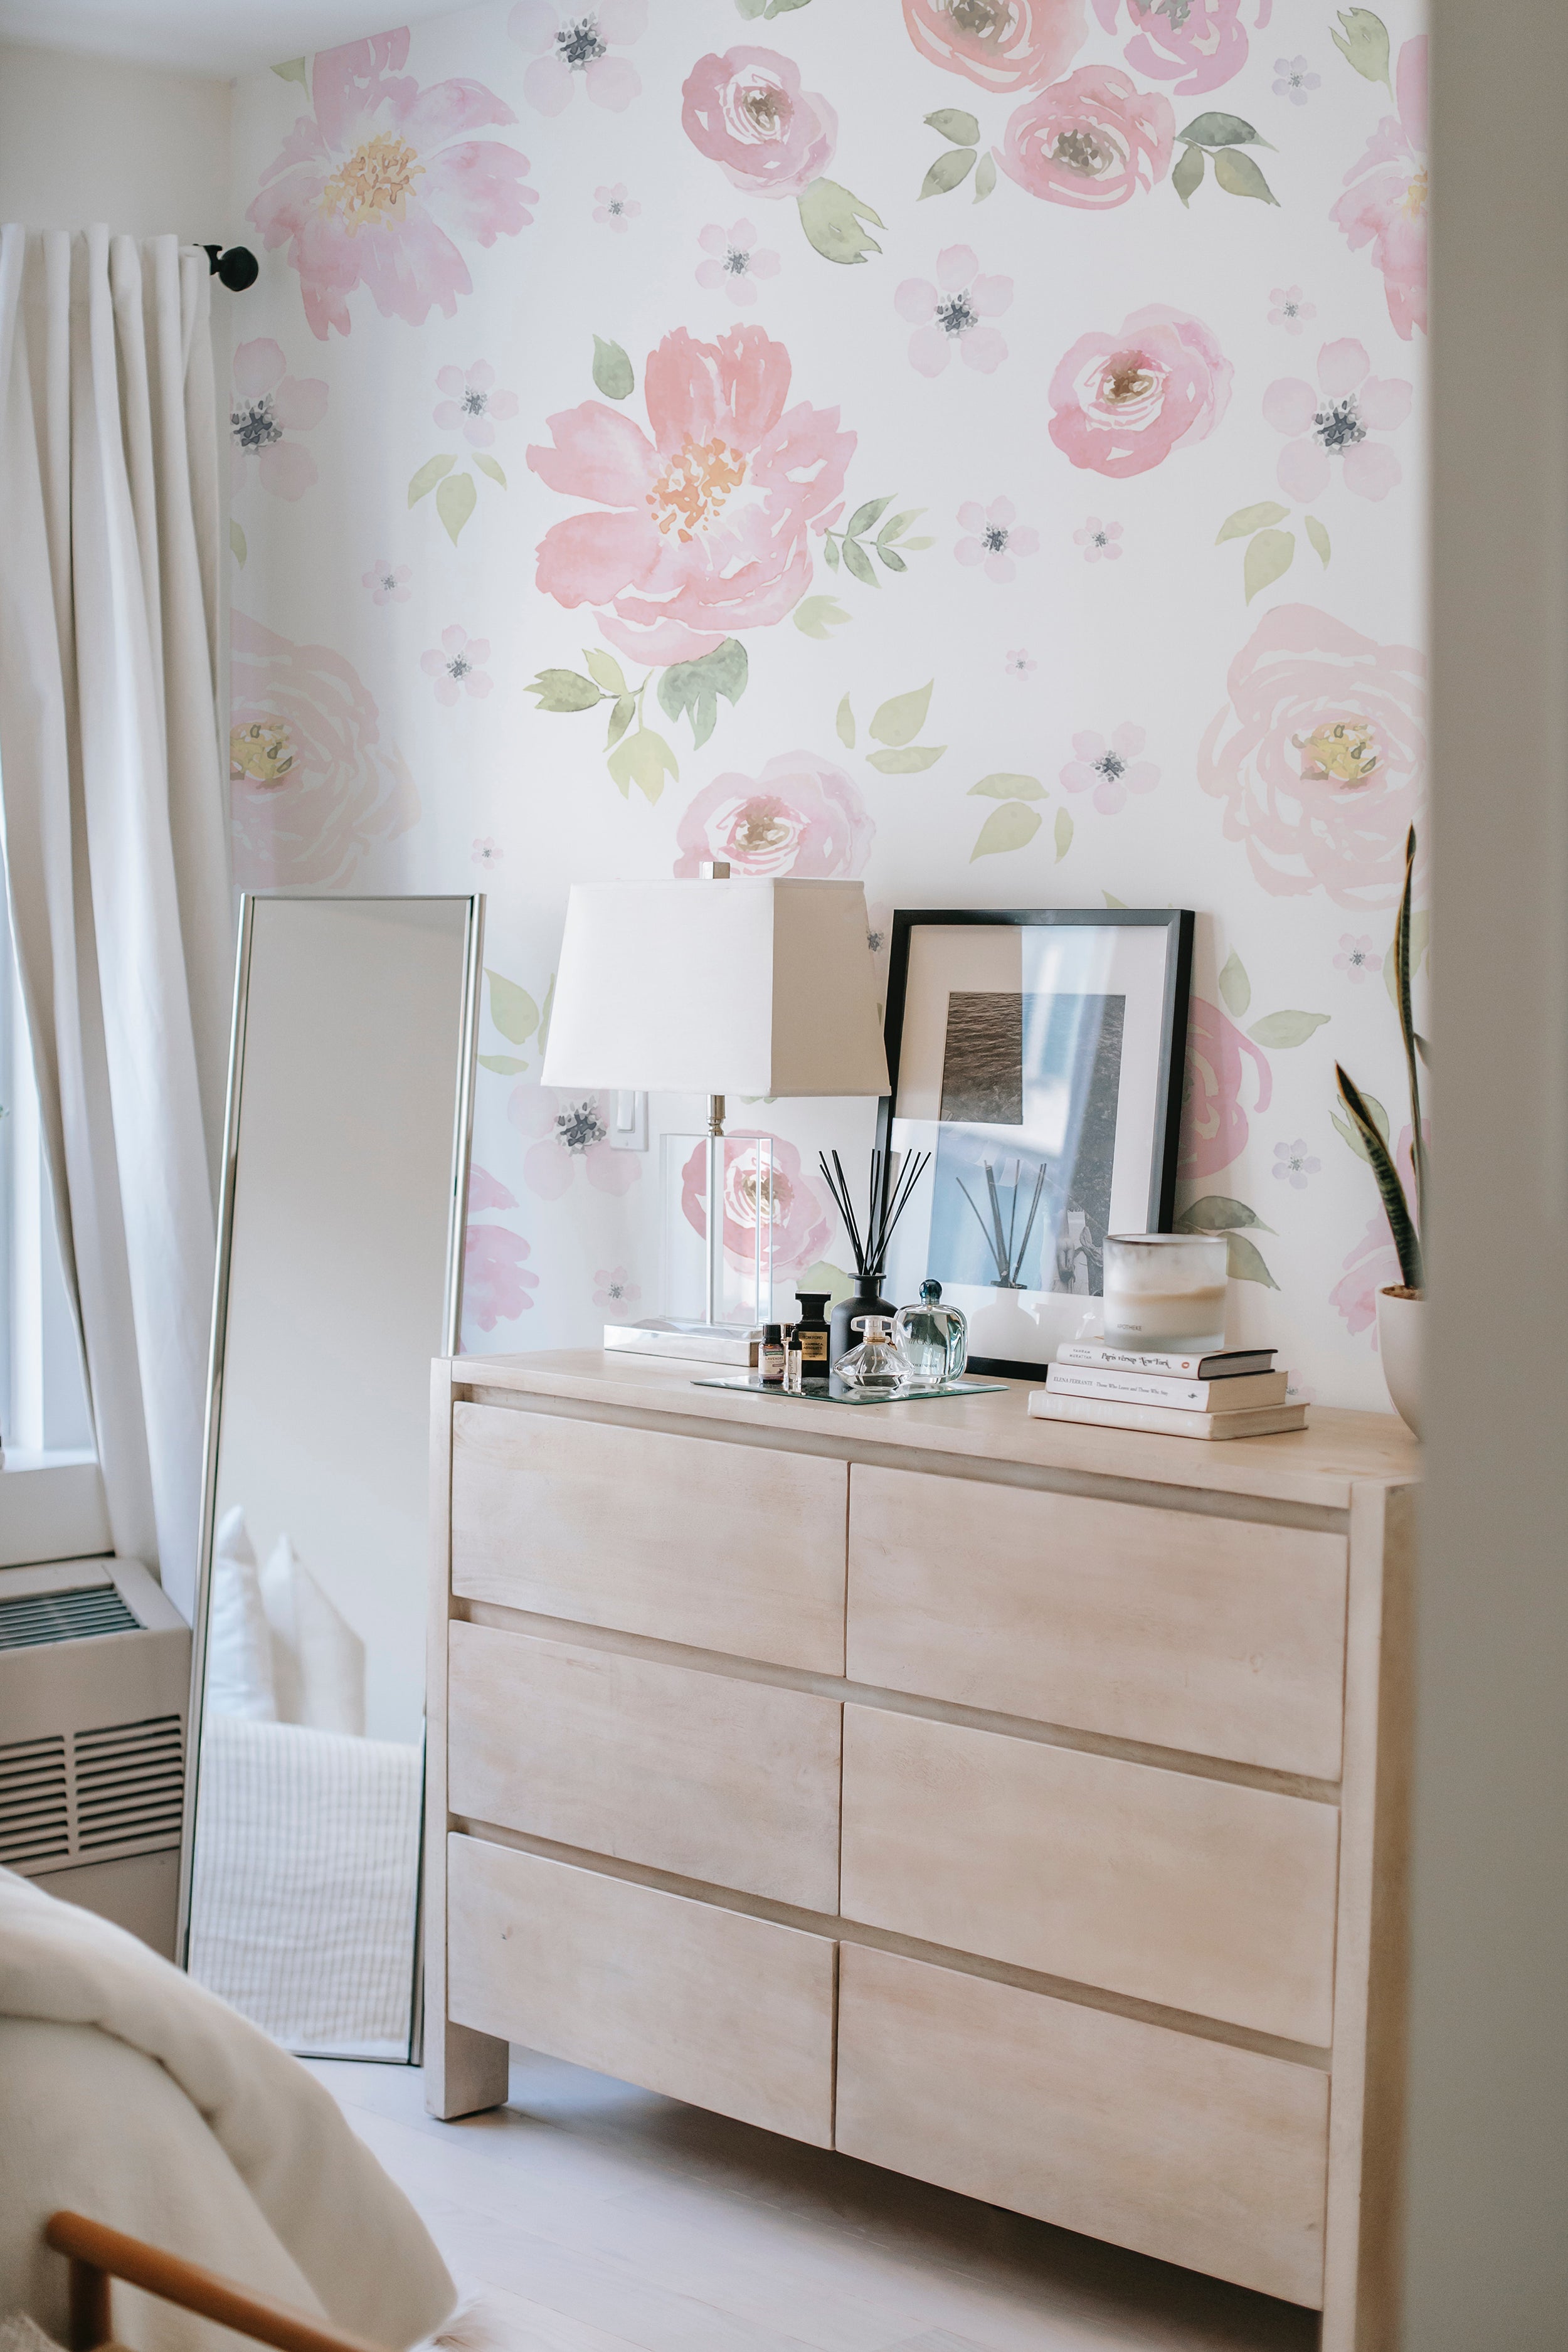 A stylish bedroom setup showcasing the Gentle Blossom Wallpaper - 75" on the main wall behind a contemporary wooden dresser and a large mirror. The wallpaper's lush pink floral pattern adds a touch of femininity and warmth, complementing the minimalistic decor and neutral furniture